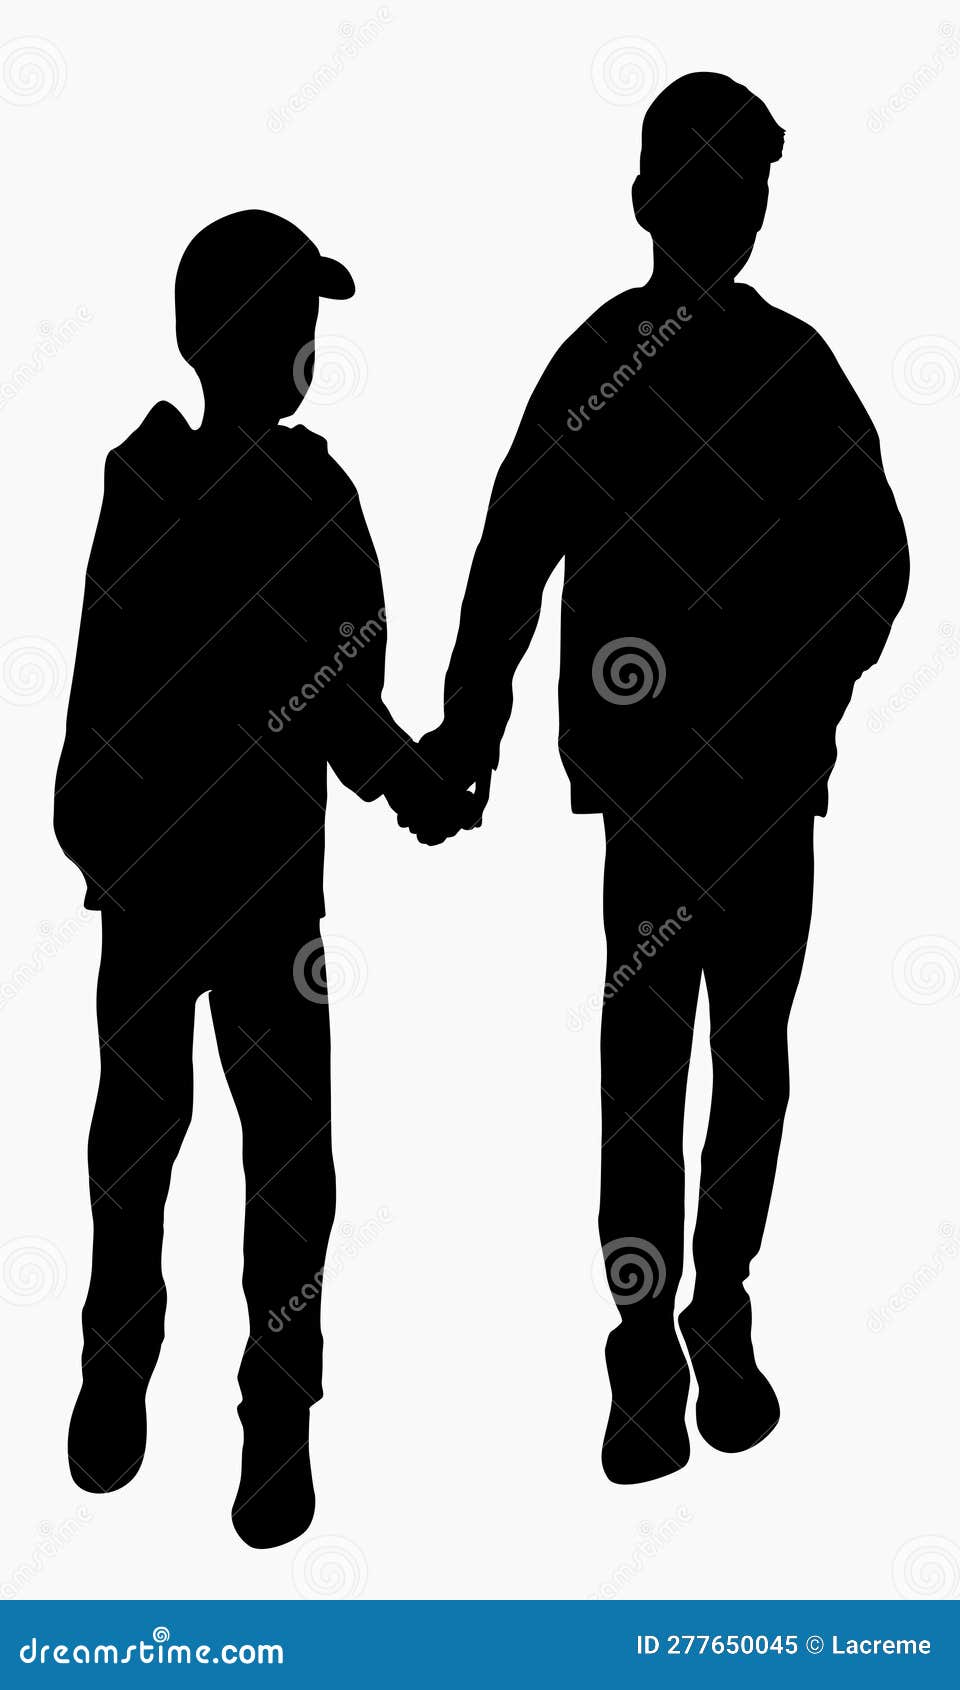 Two brothers silhouettes stock vector. Illustration of creative - 277650045